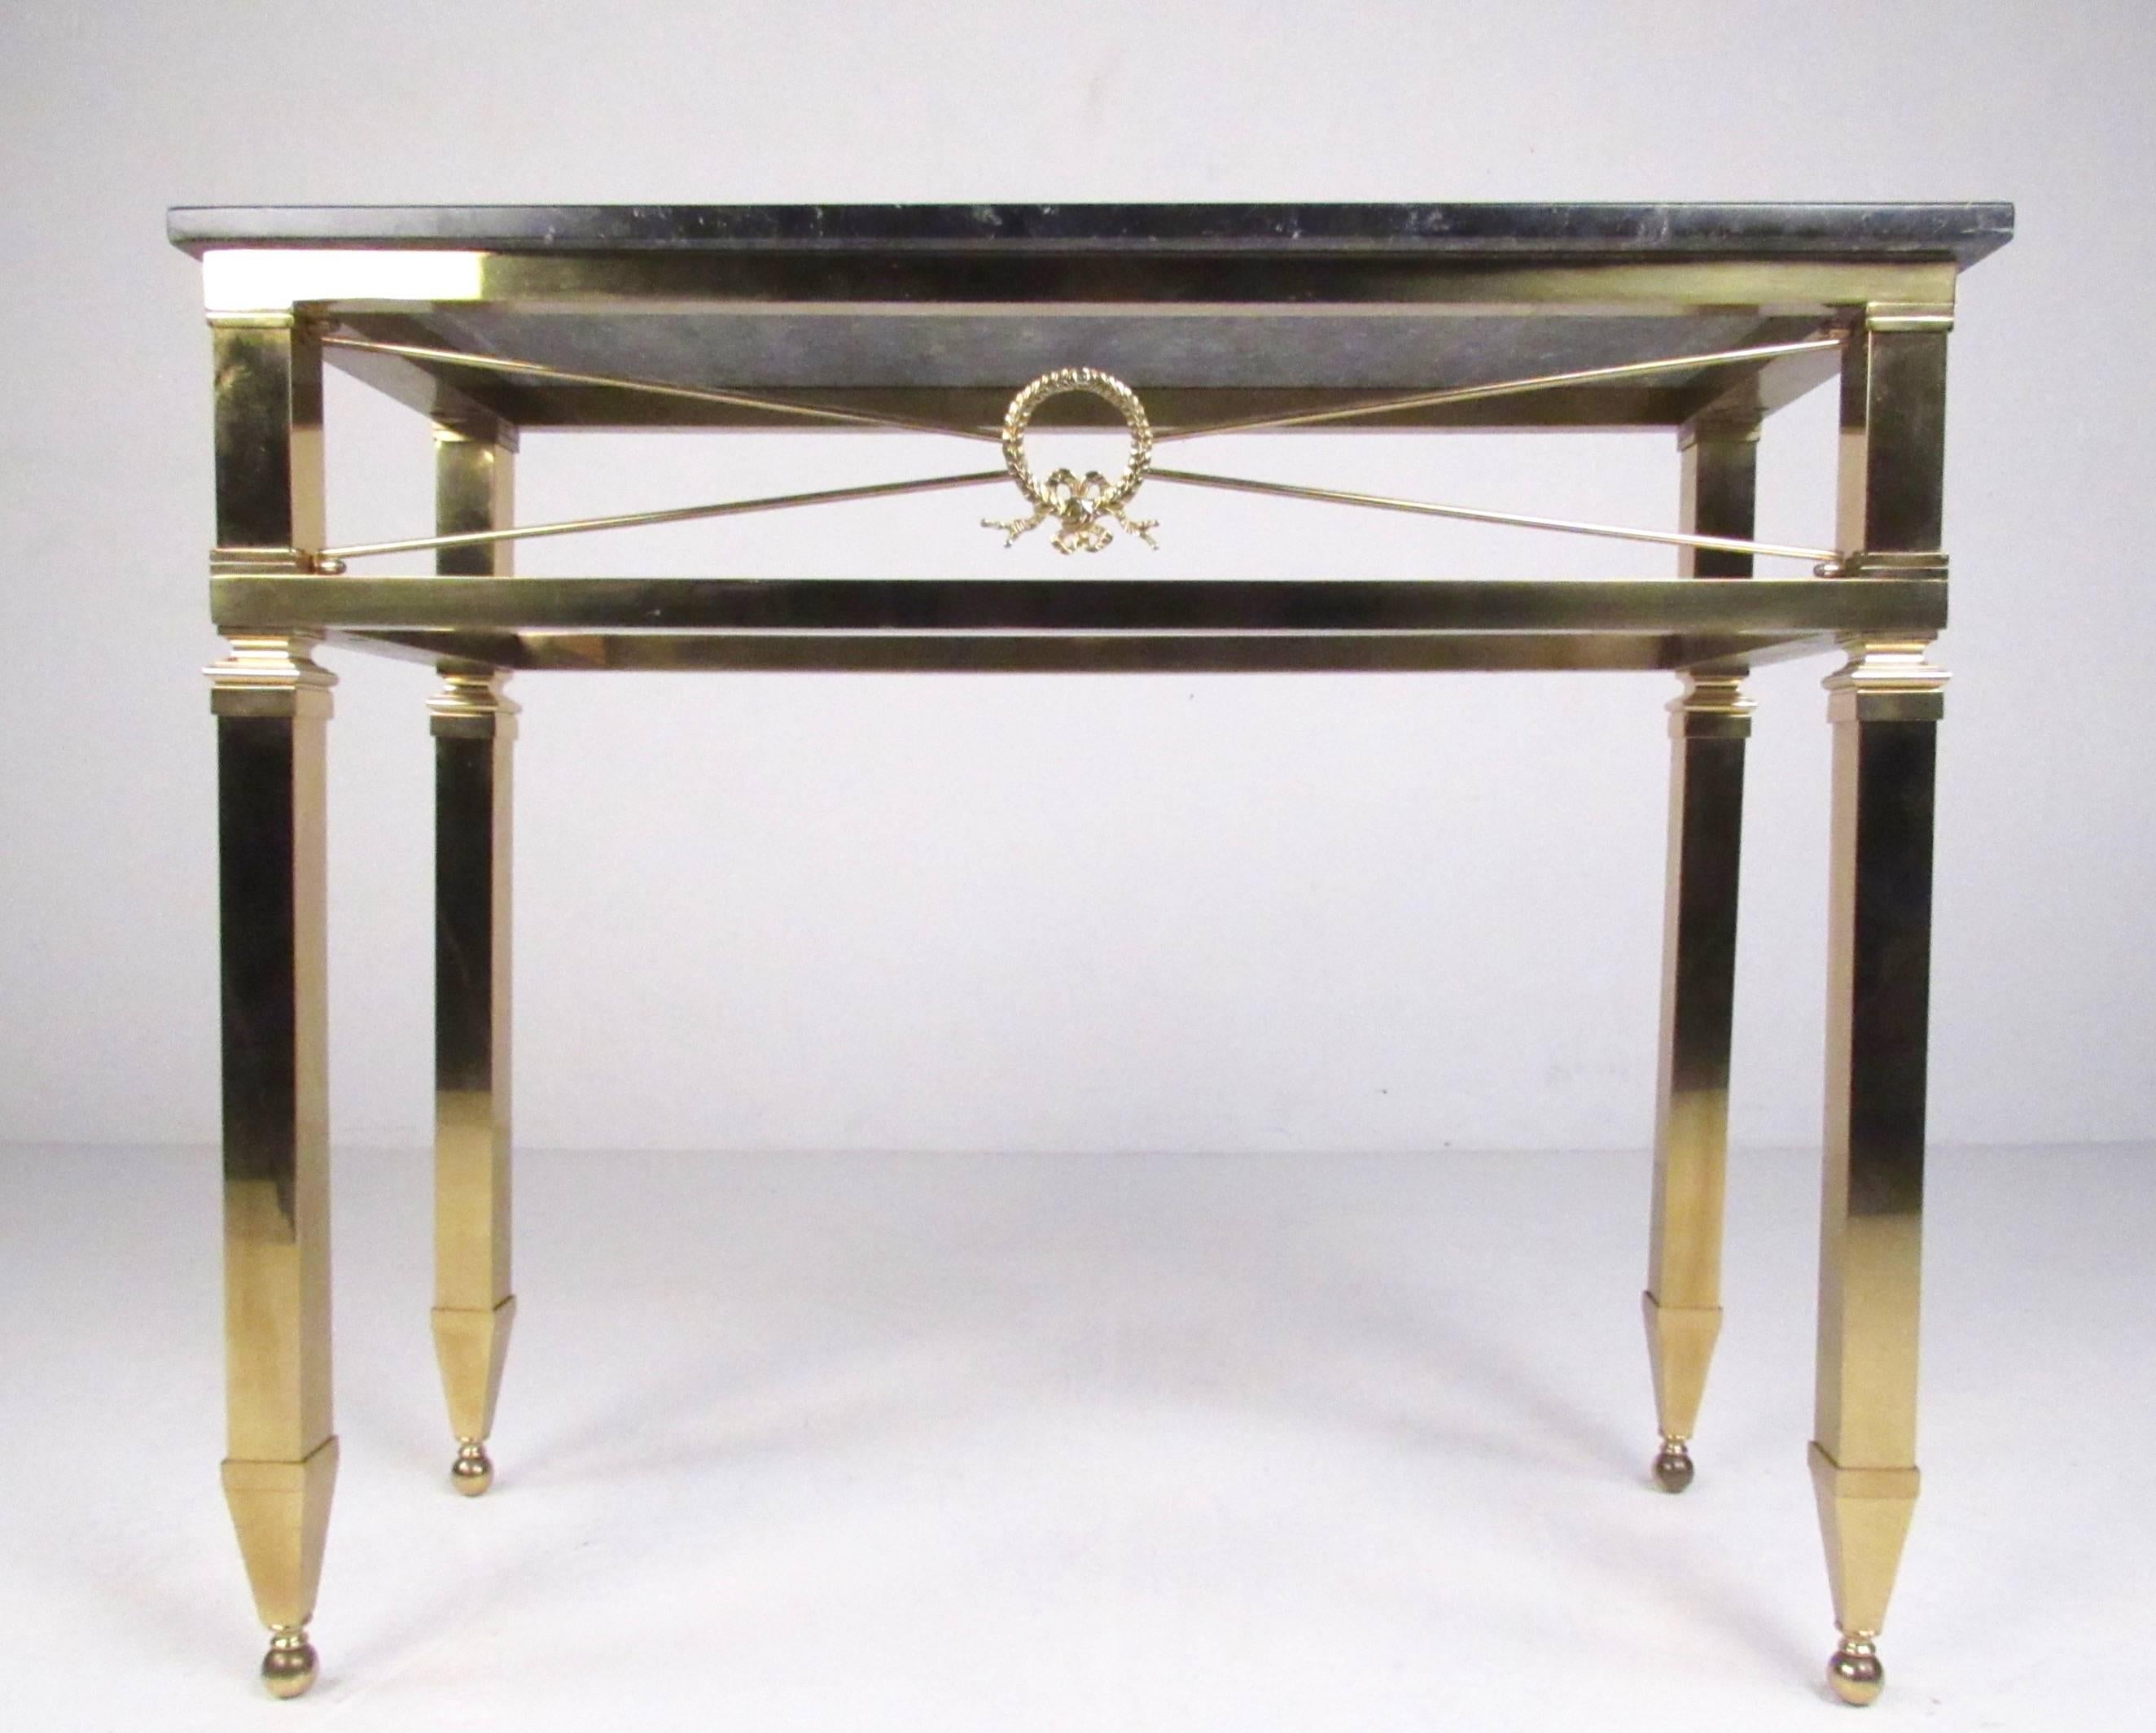 This elegant Italian Directoire style console table features ornate brass frame with heavy marble top. This impressive hall table boasts sleek tapered legs, perfect console height, and impressive medallion detail, making a striking addition in any